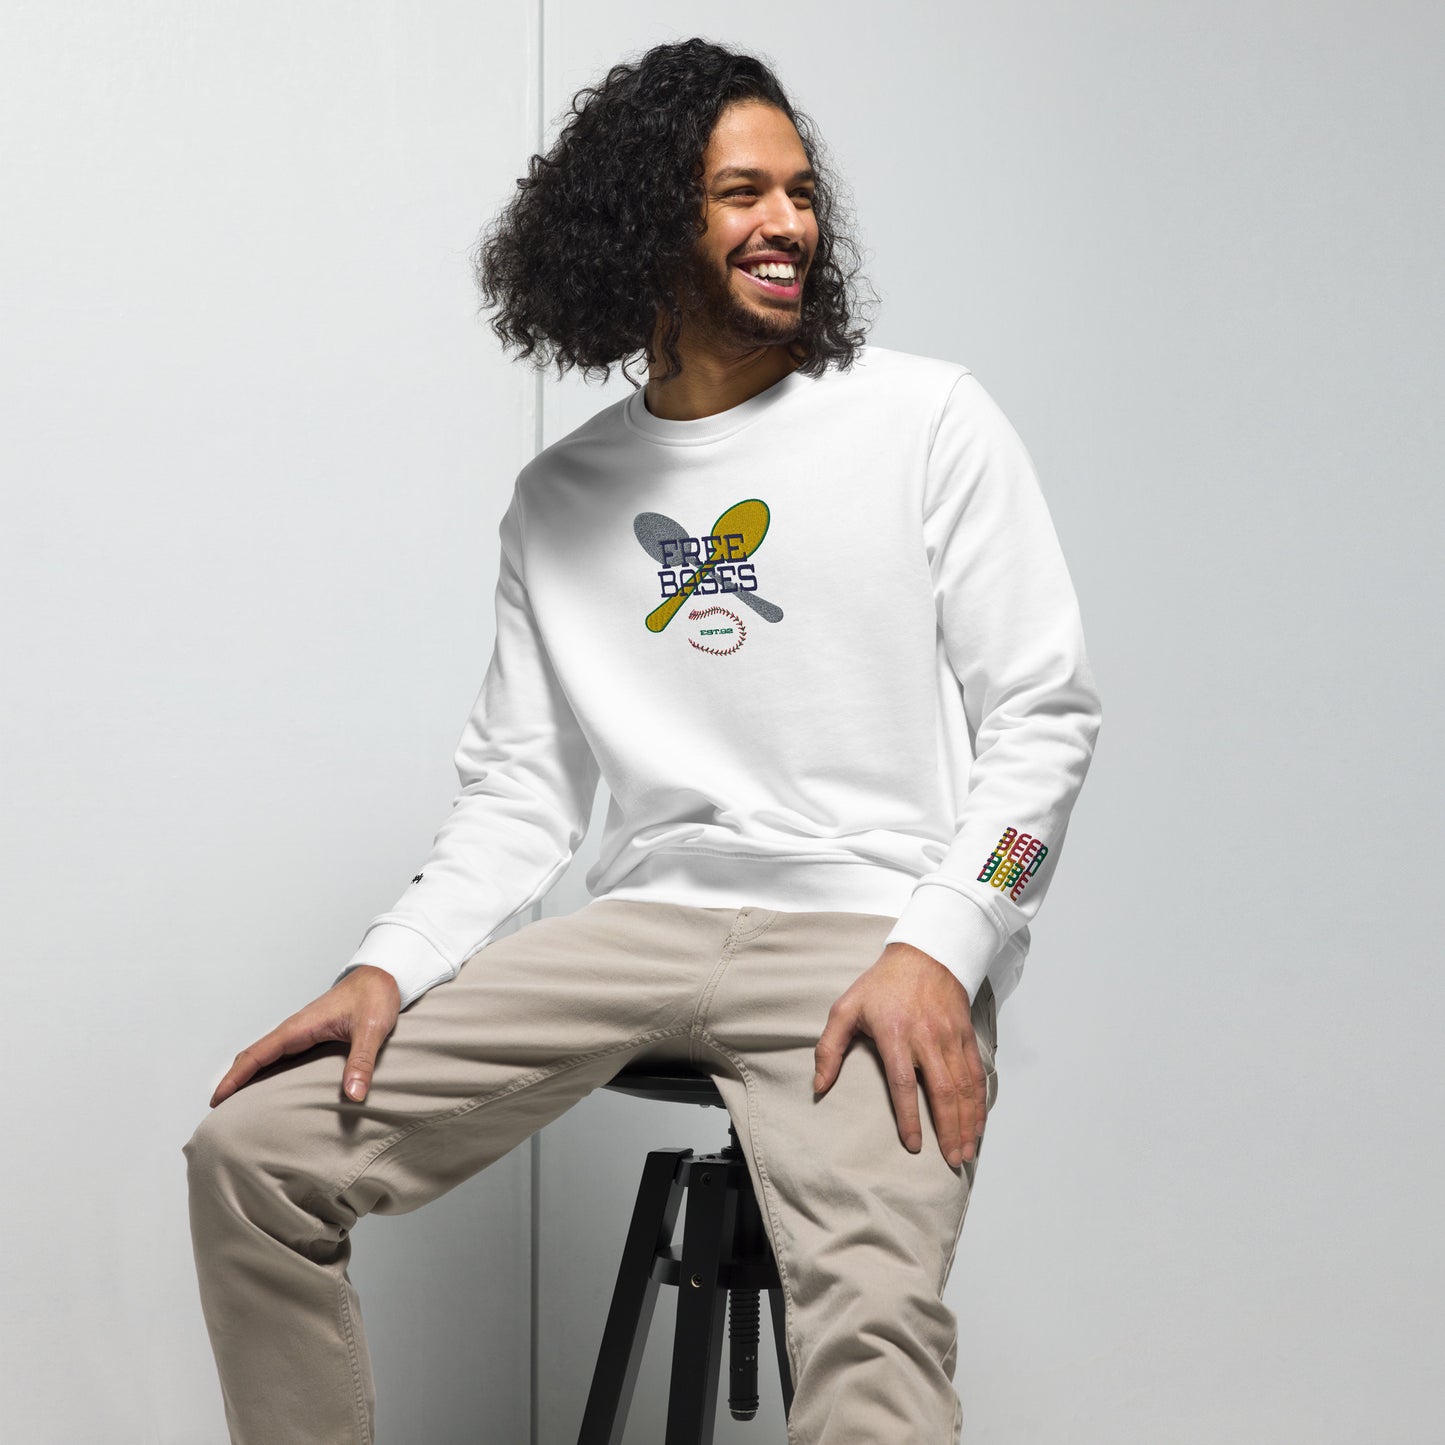 Free Bases of Spoons | Unisex French Terry Sweatshirt | Embroidered